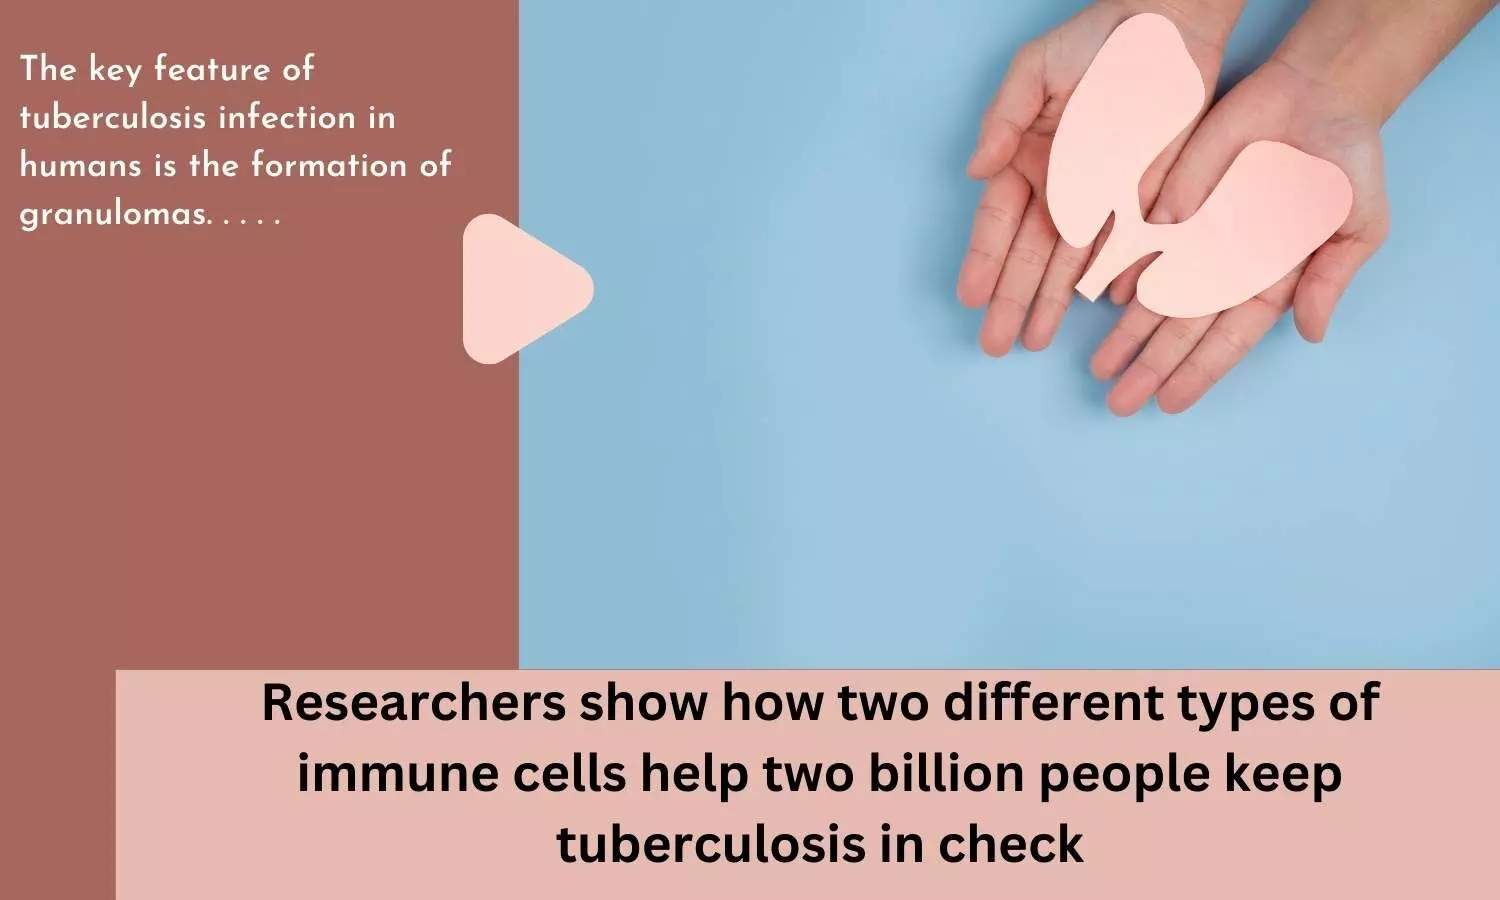 Researchers show how two different types of immune cells help two billion people keep tuberculosis in check